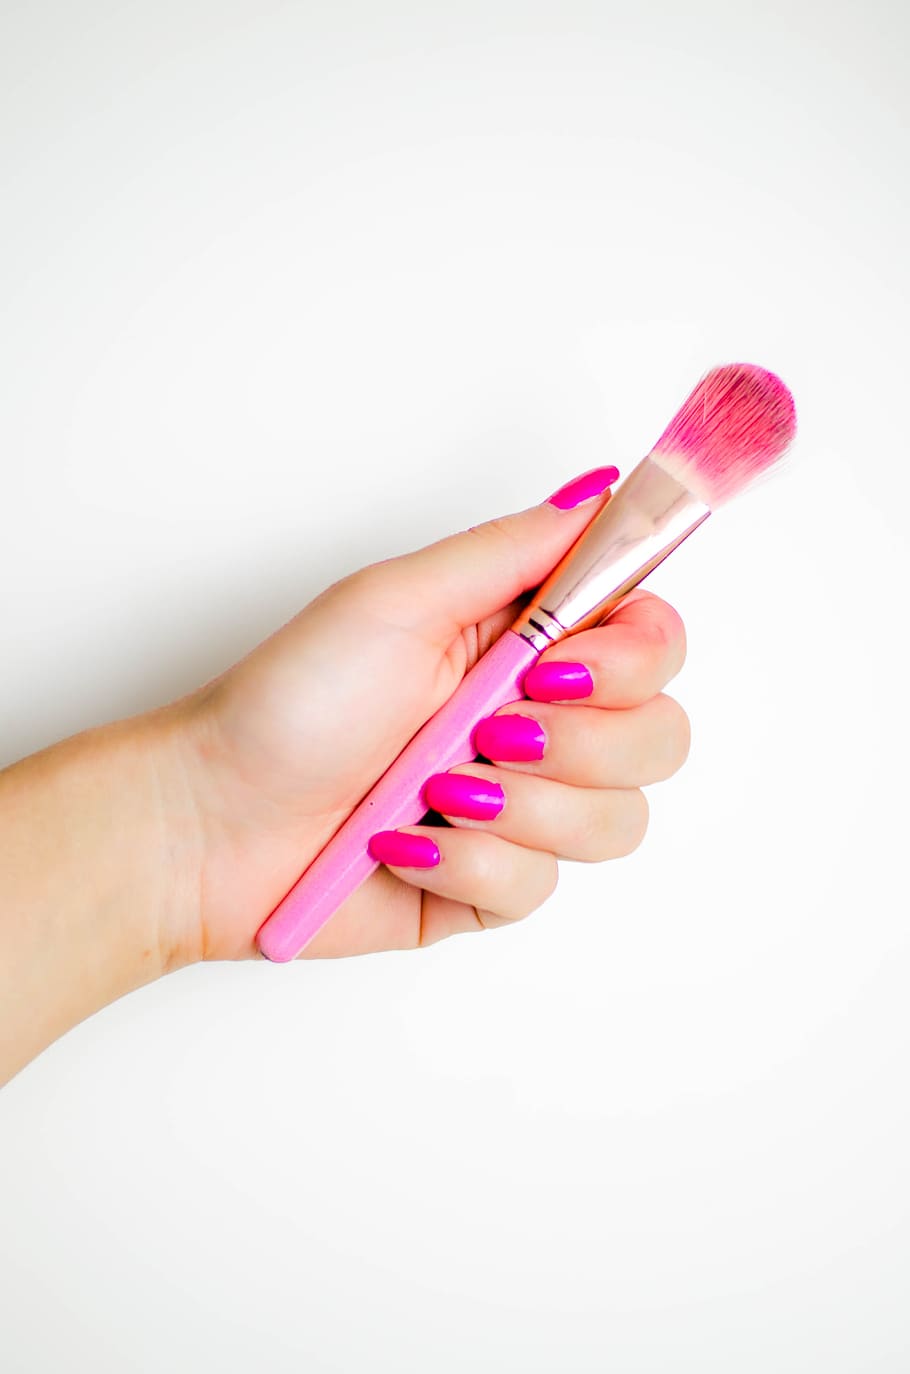 hand, ręka, brush, nails, pink, cosmetics, makeup, manicure, product, hands